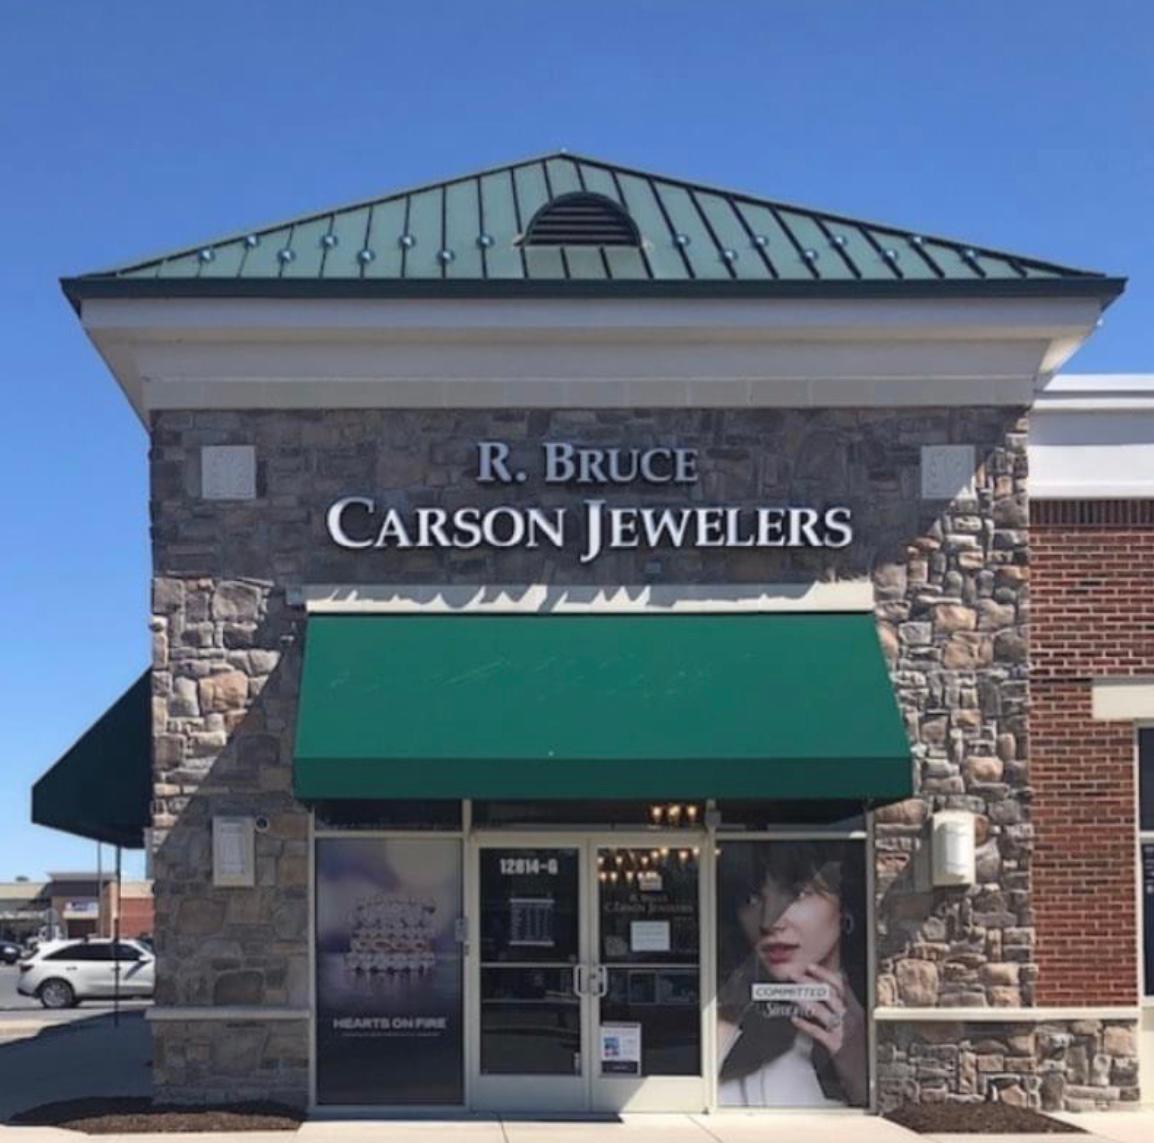 Carson Jewelers - Hagerstown, MD 21742 - (301)739-0830 | ShowMeLocal.com